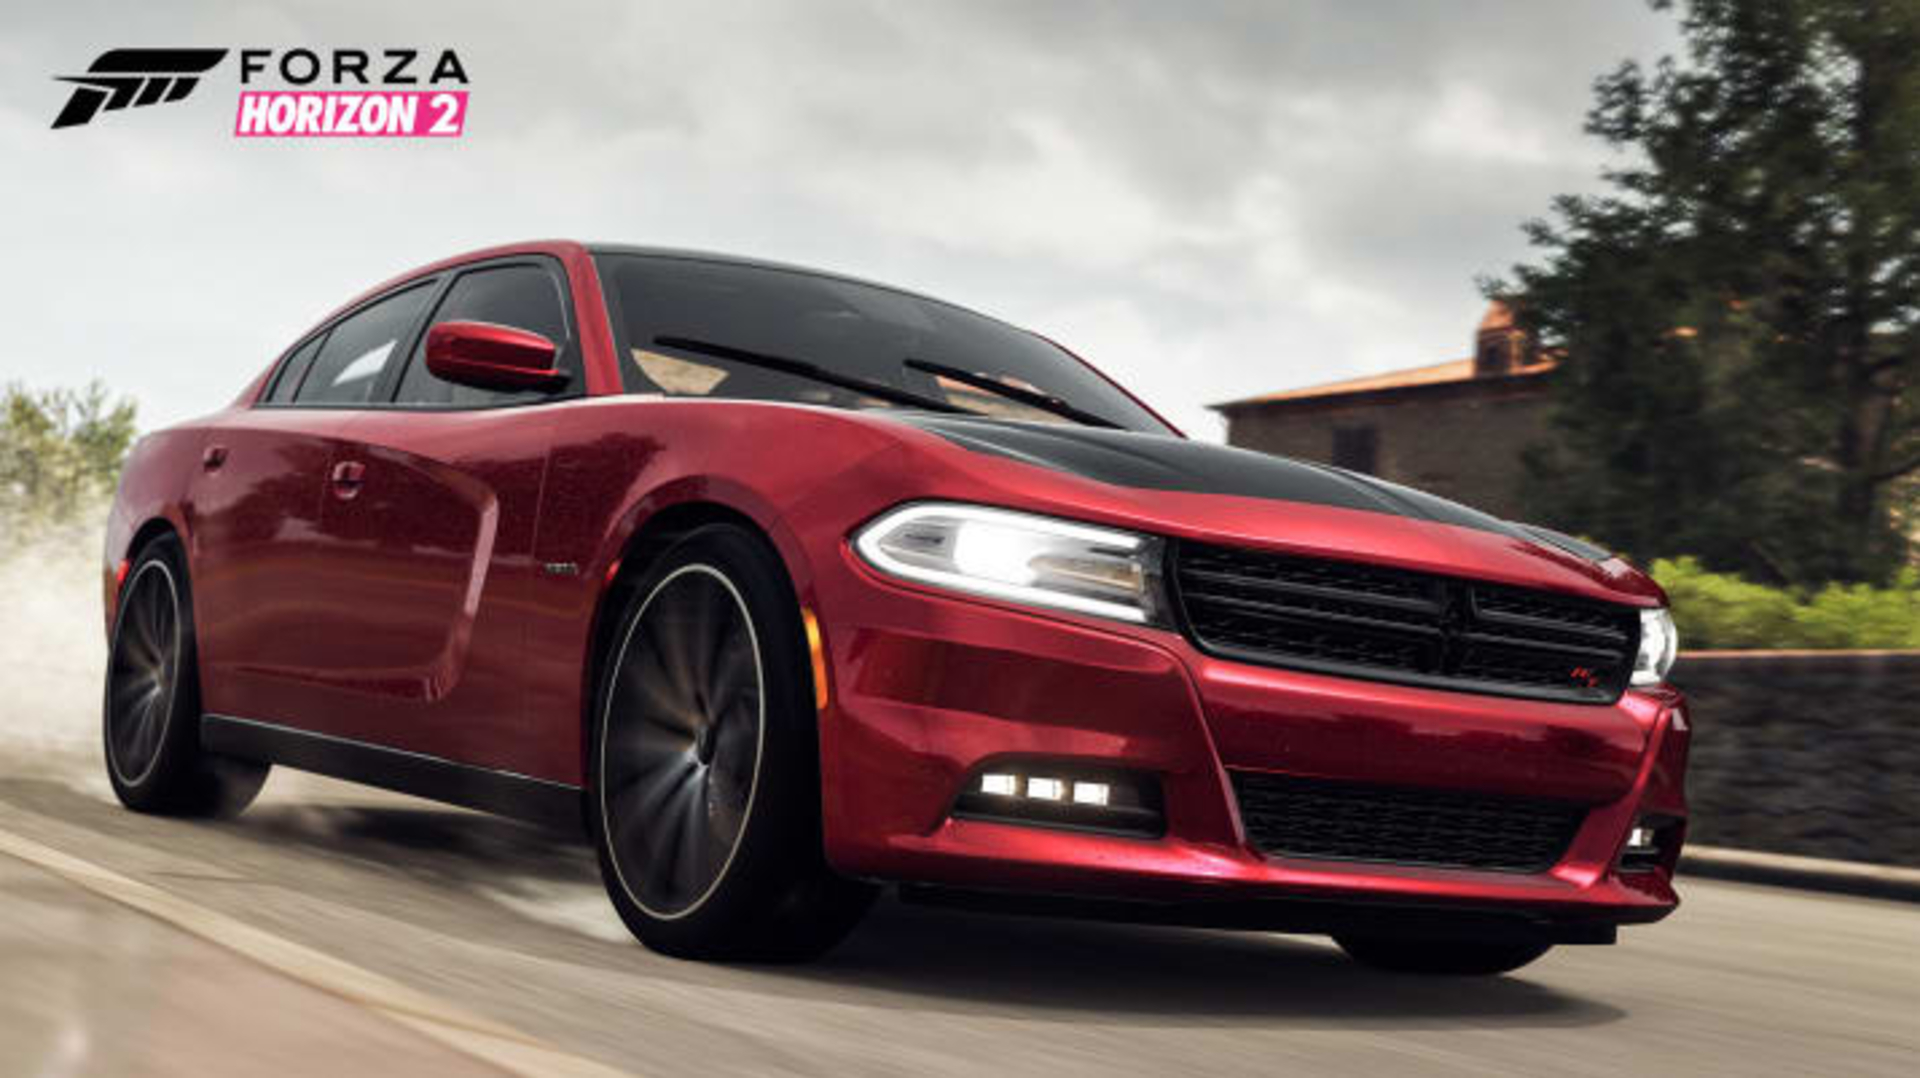 Forza Horizon 2 Presents Fast and Furious 2015 Dodge Charger R/T